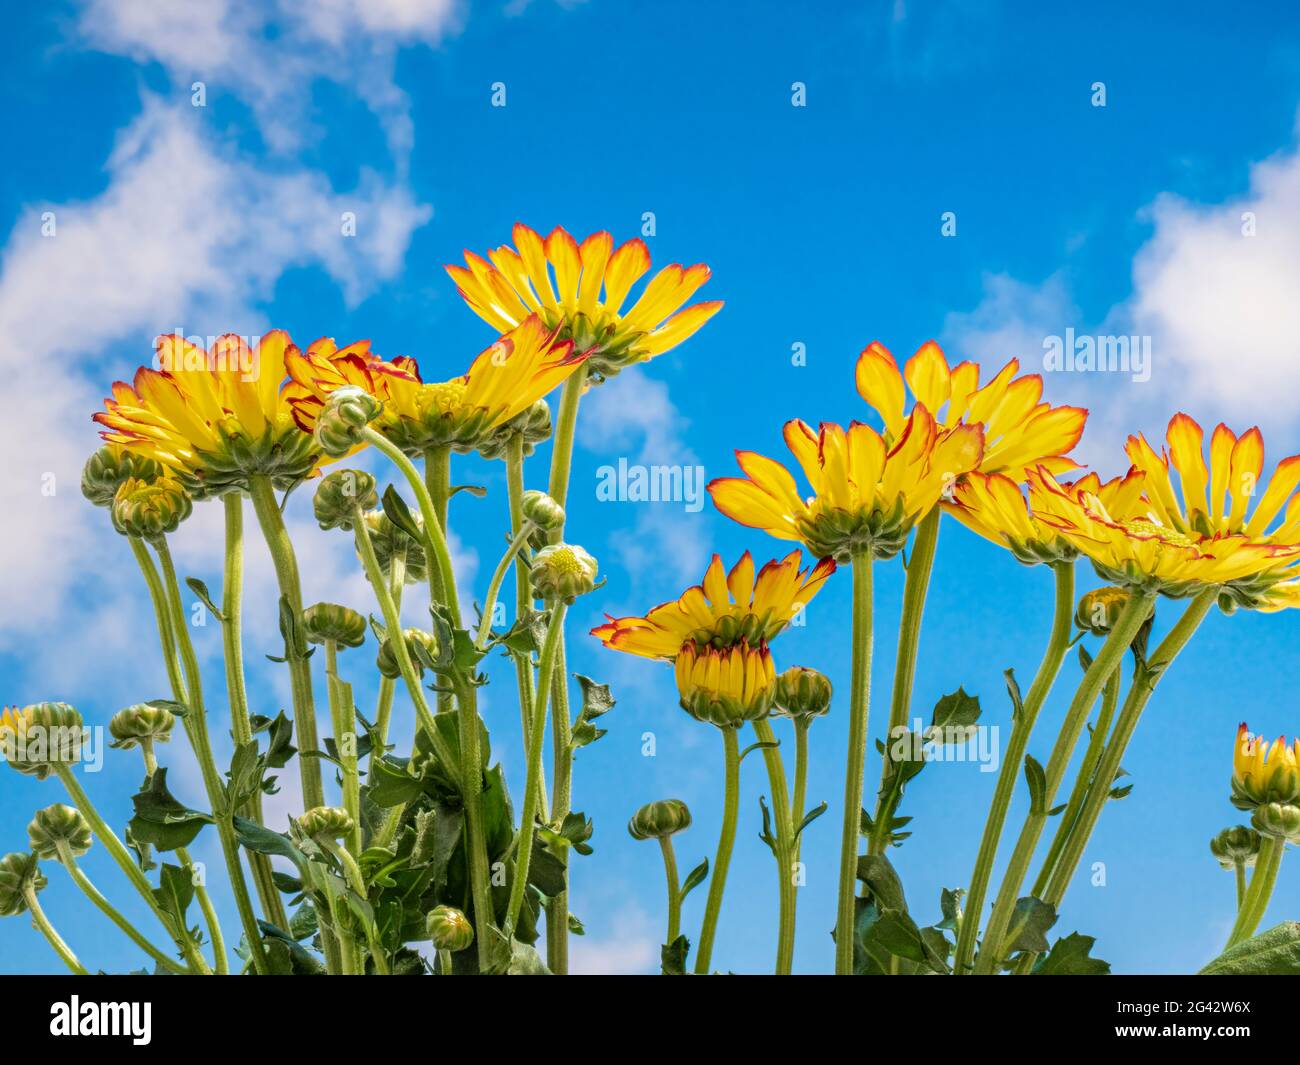 Close up of chrysanthemums against blue sky with white fluffy clouds Stock Photo